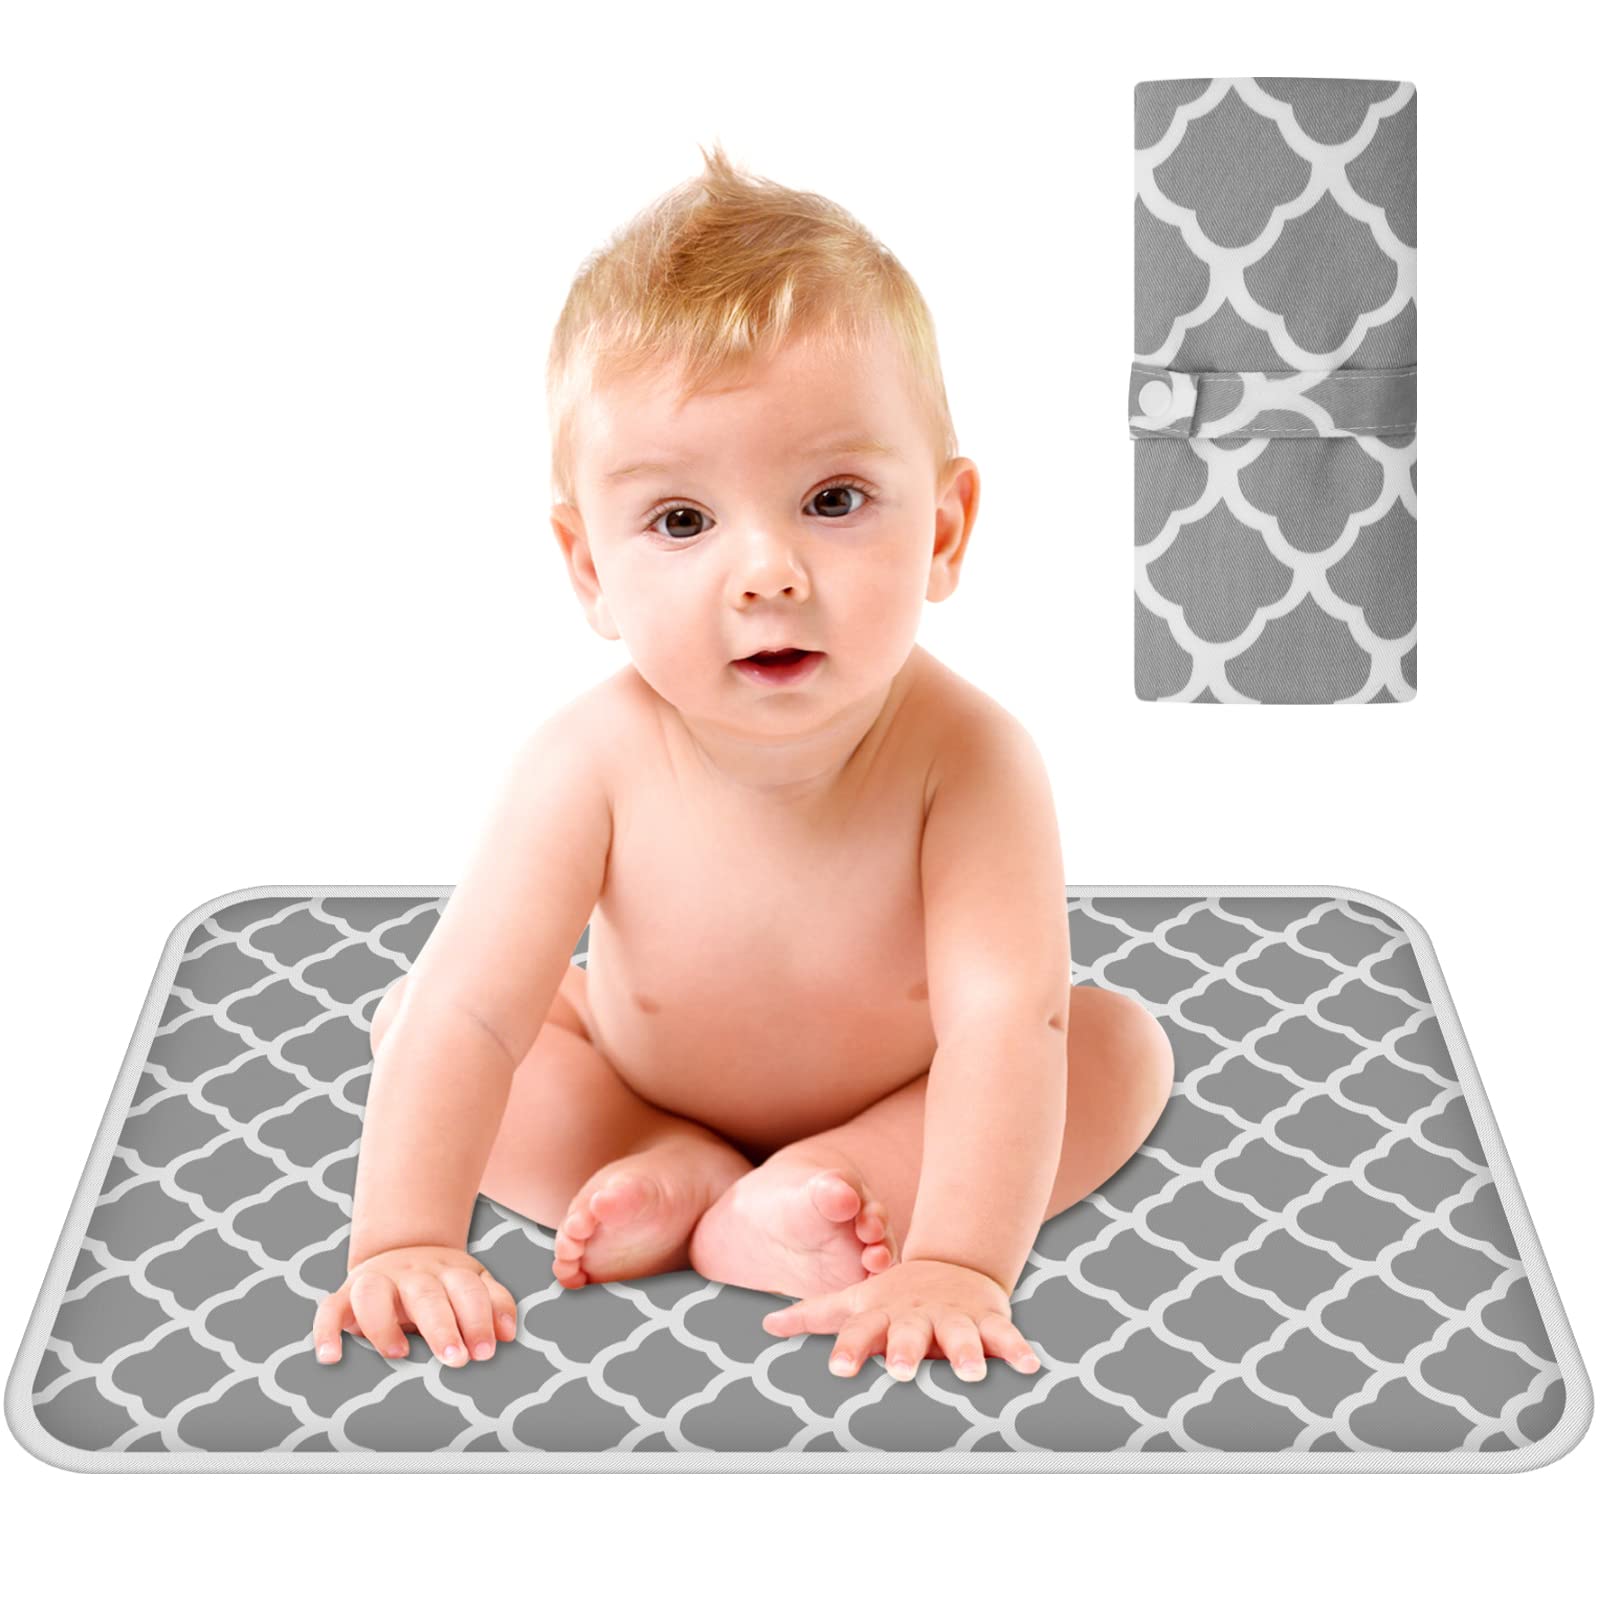 Portable Nappy Changing Mat, Grey Foldable Travel Changing Mat, Unisex Infant Diapering Sheet Protector Cotton Absorbent Sheet Bed Pads for Home Travel Outside（60 * 35cm）